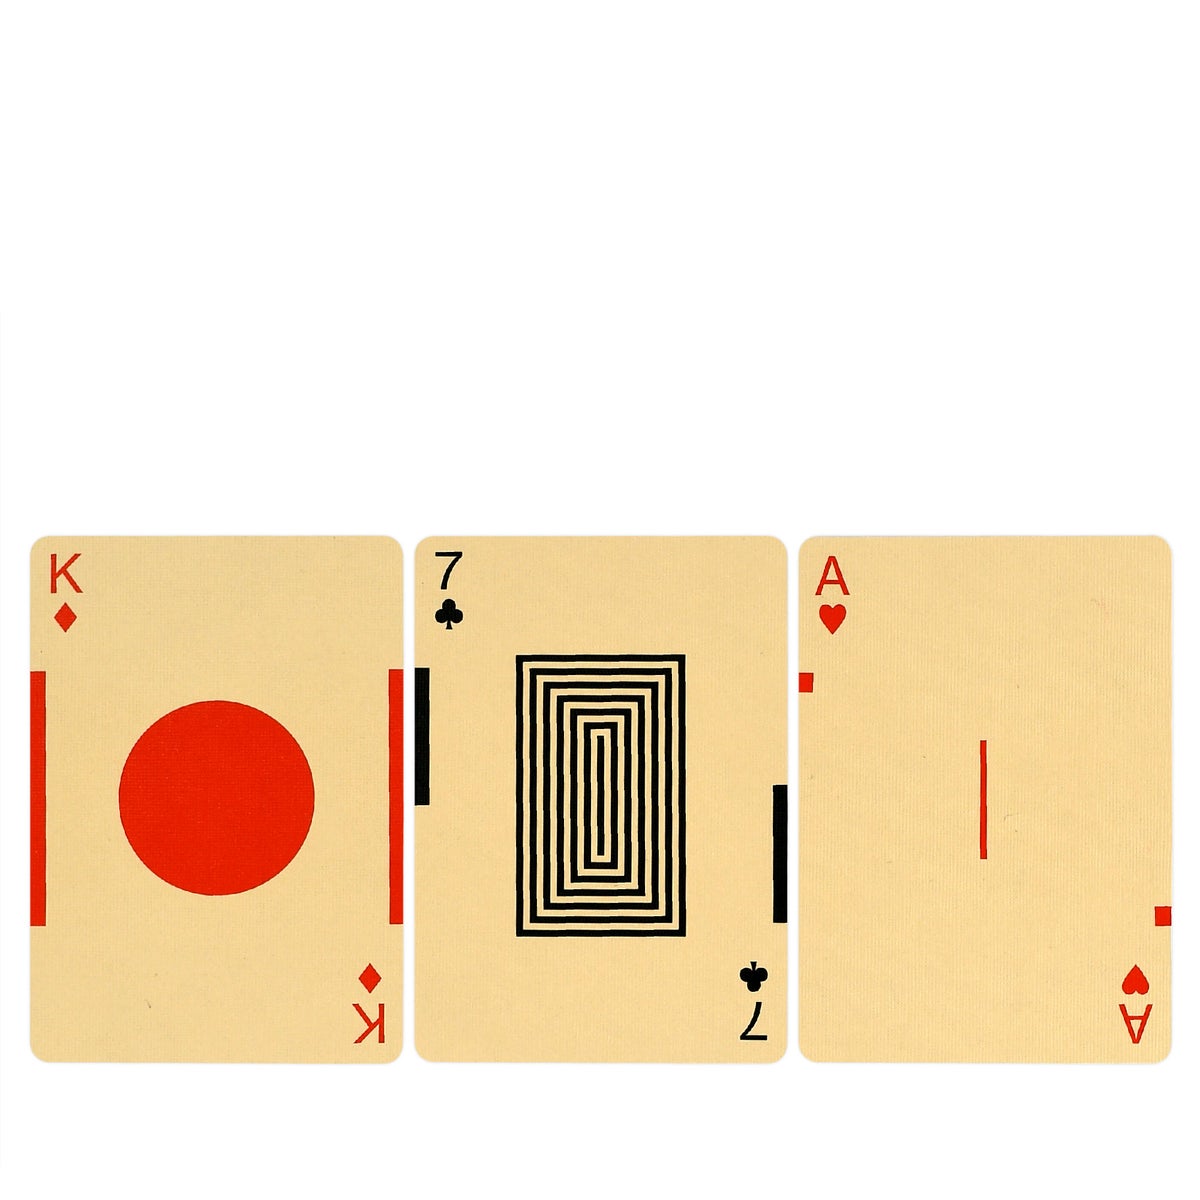 ART OF PLAY - PLAYING CARDS - EAMES DECK - RED